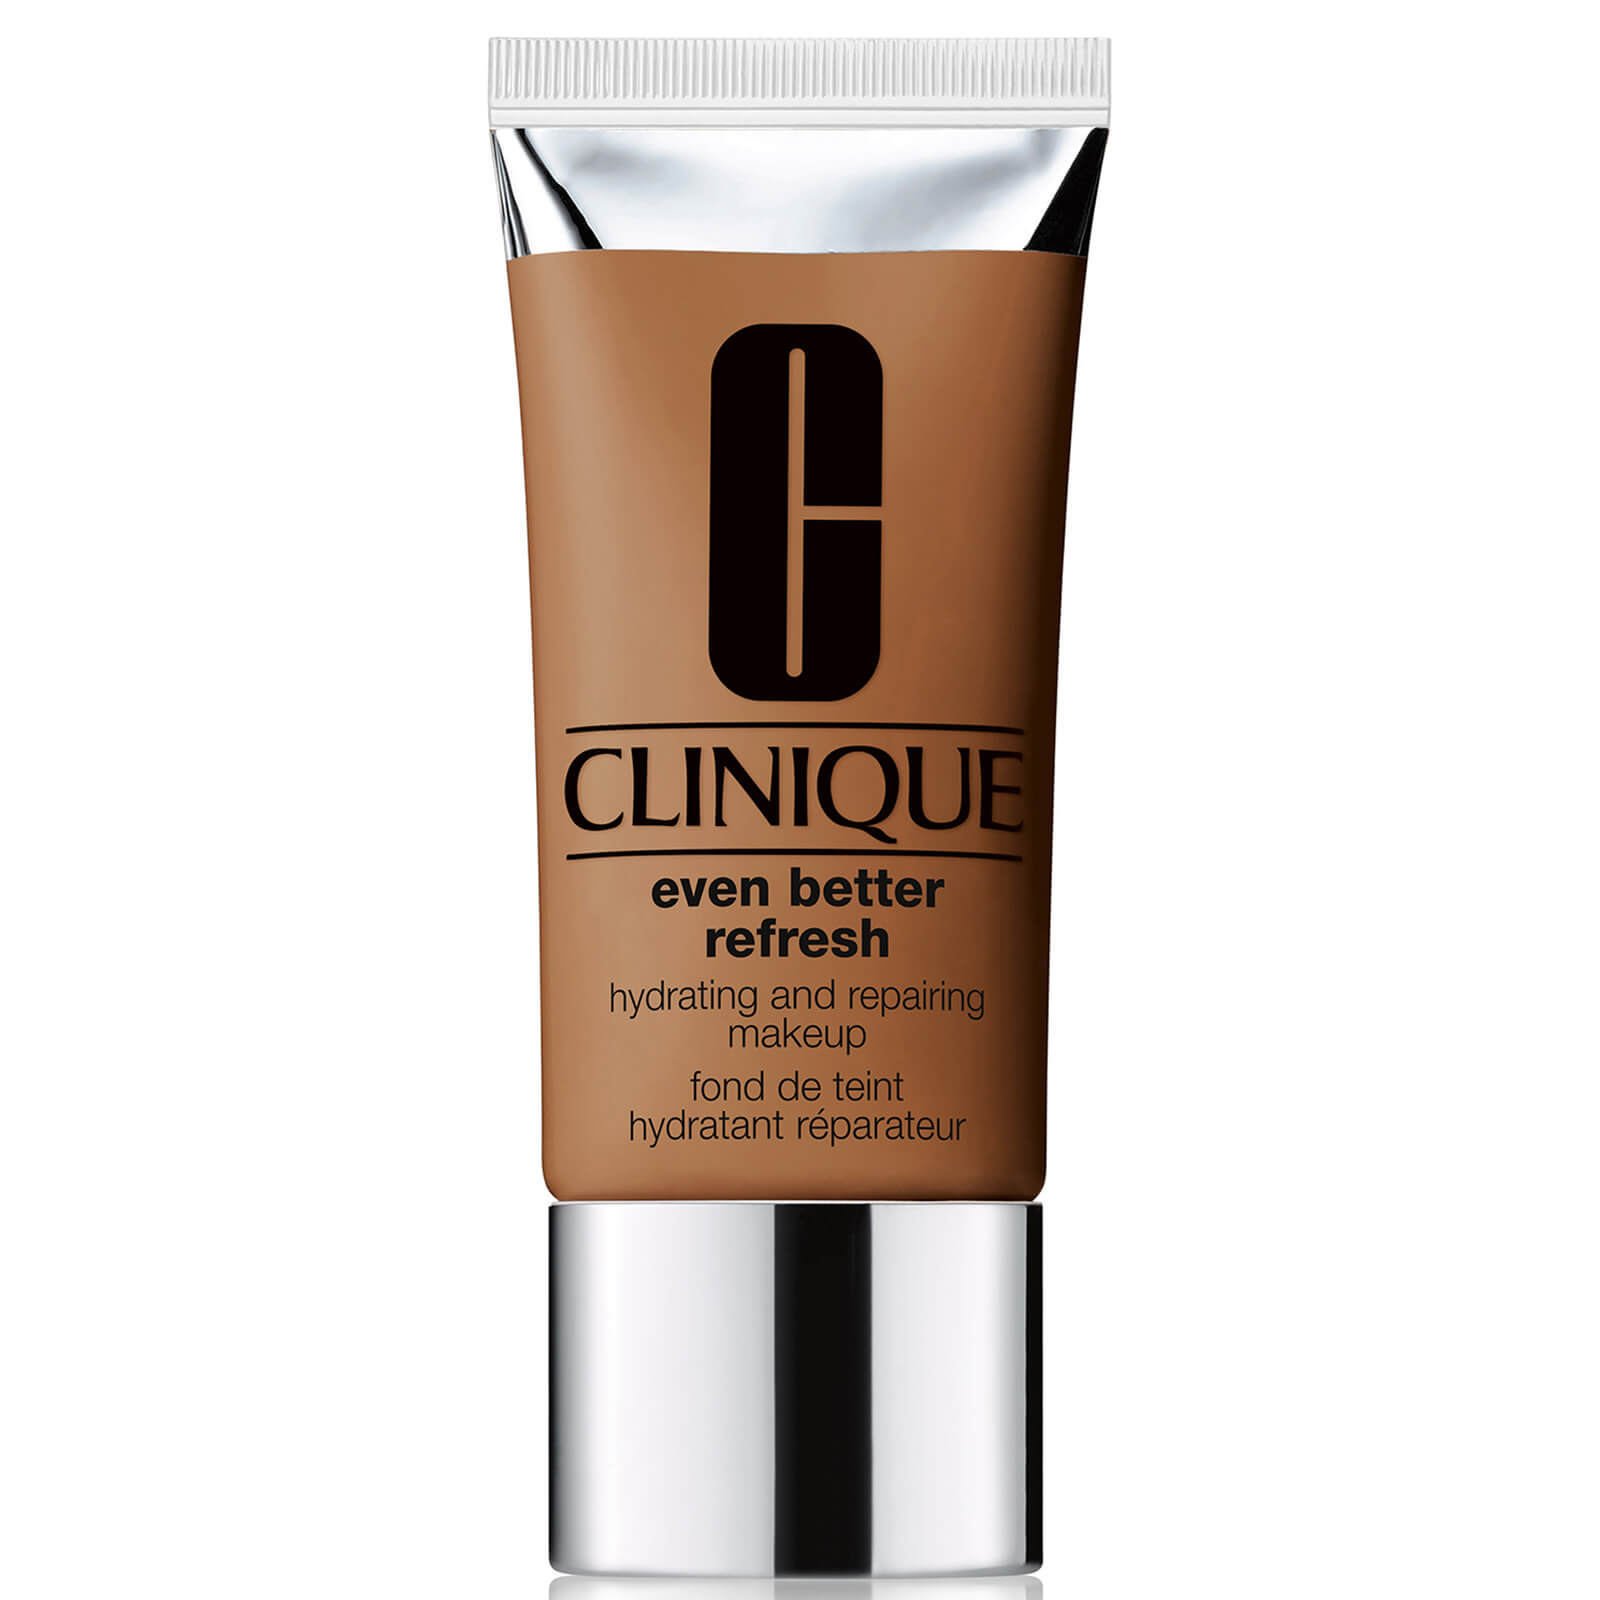 Clinique Even Better Refresh Hydrating and Repairing Makeup 30ml (Various Shades) - WN 122 Clove